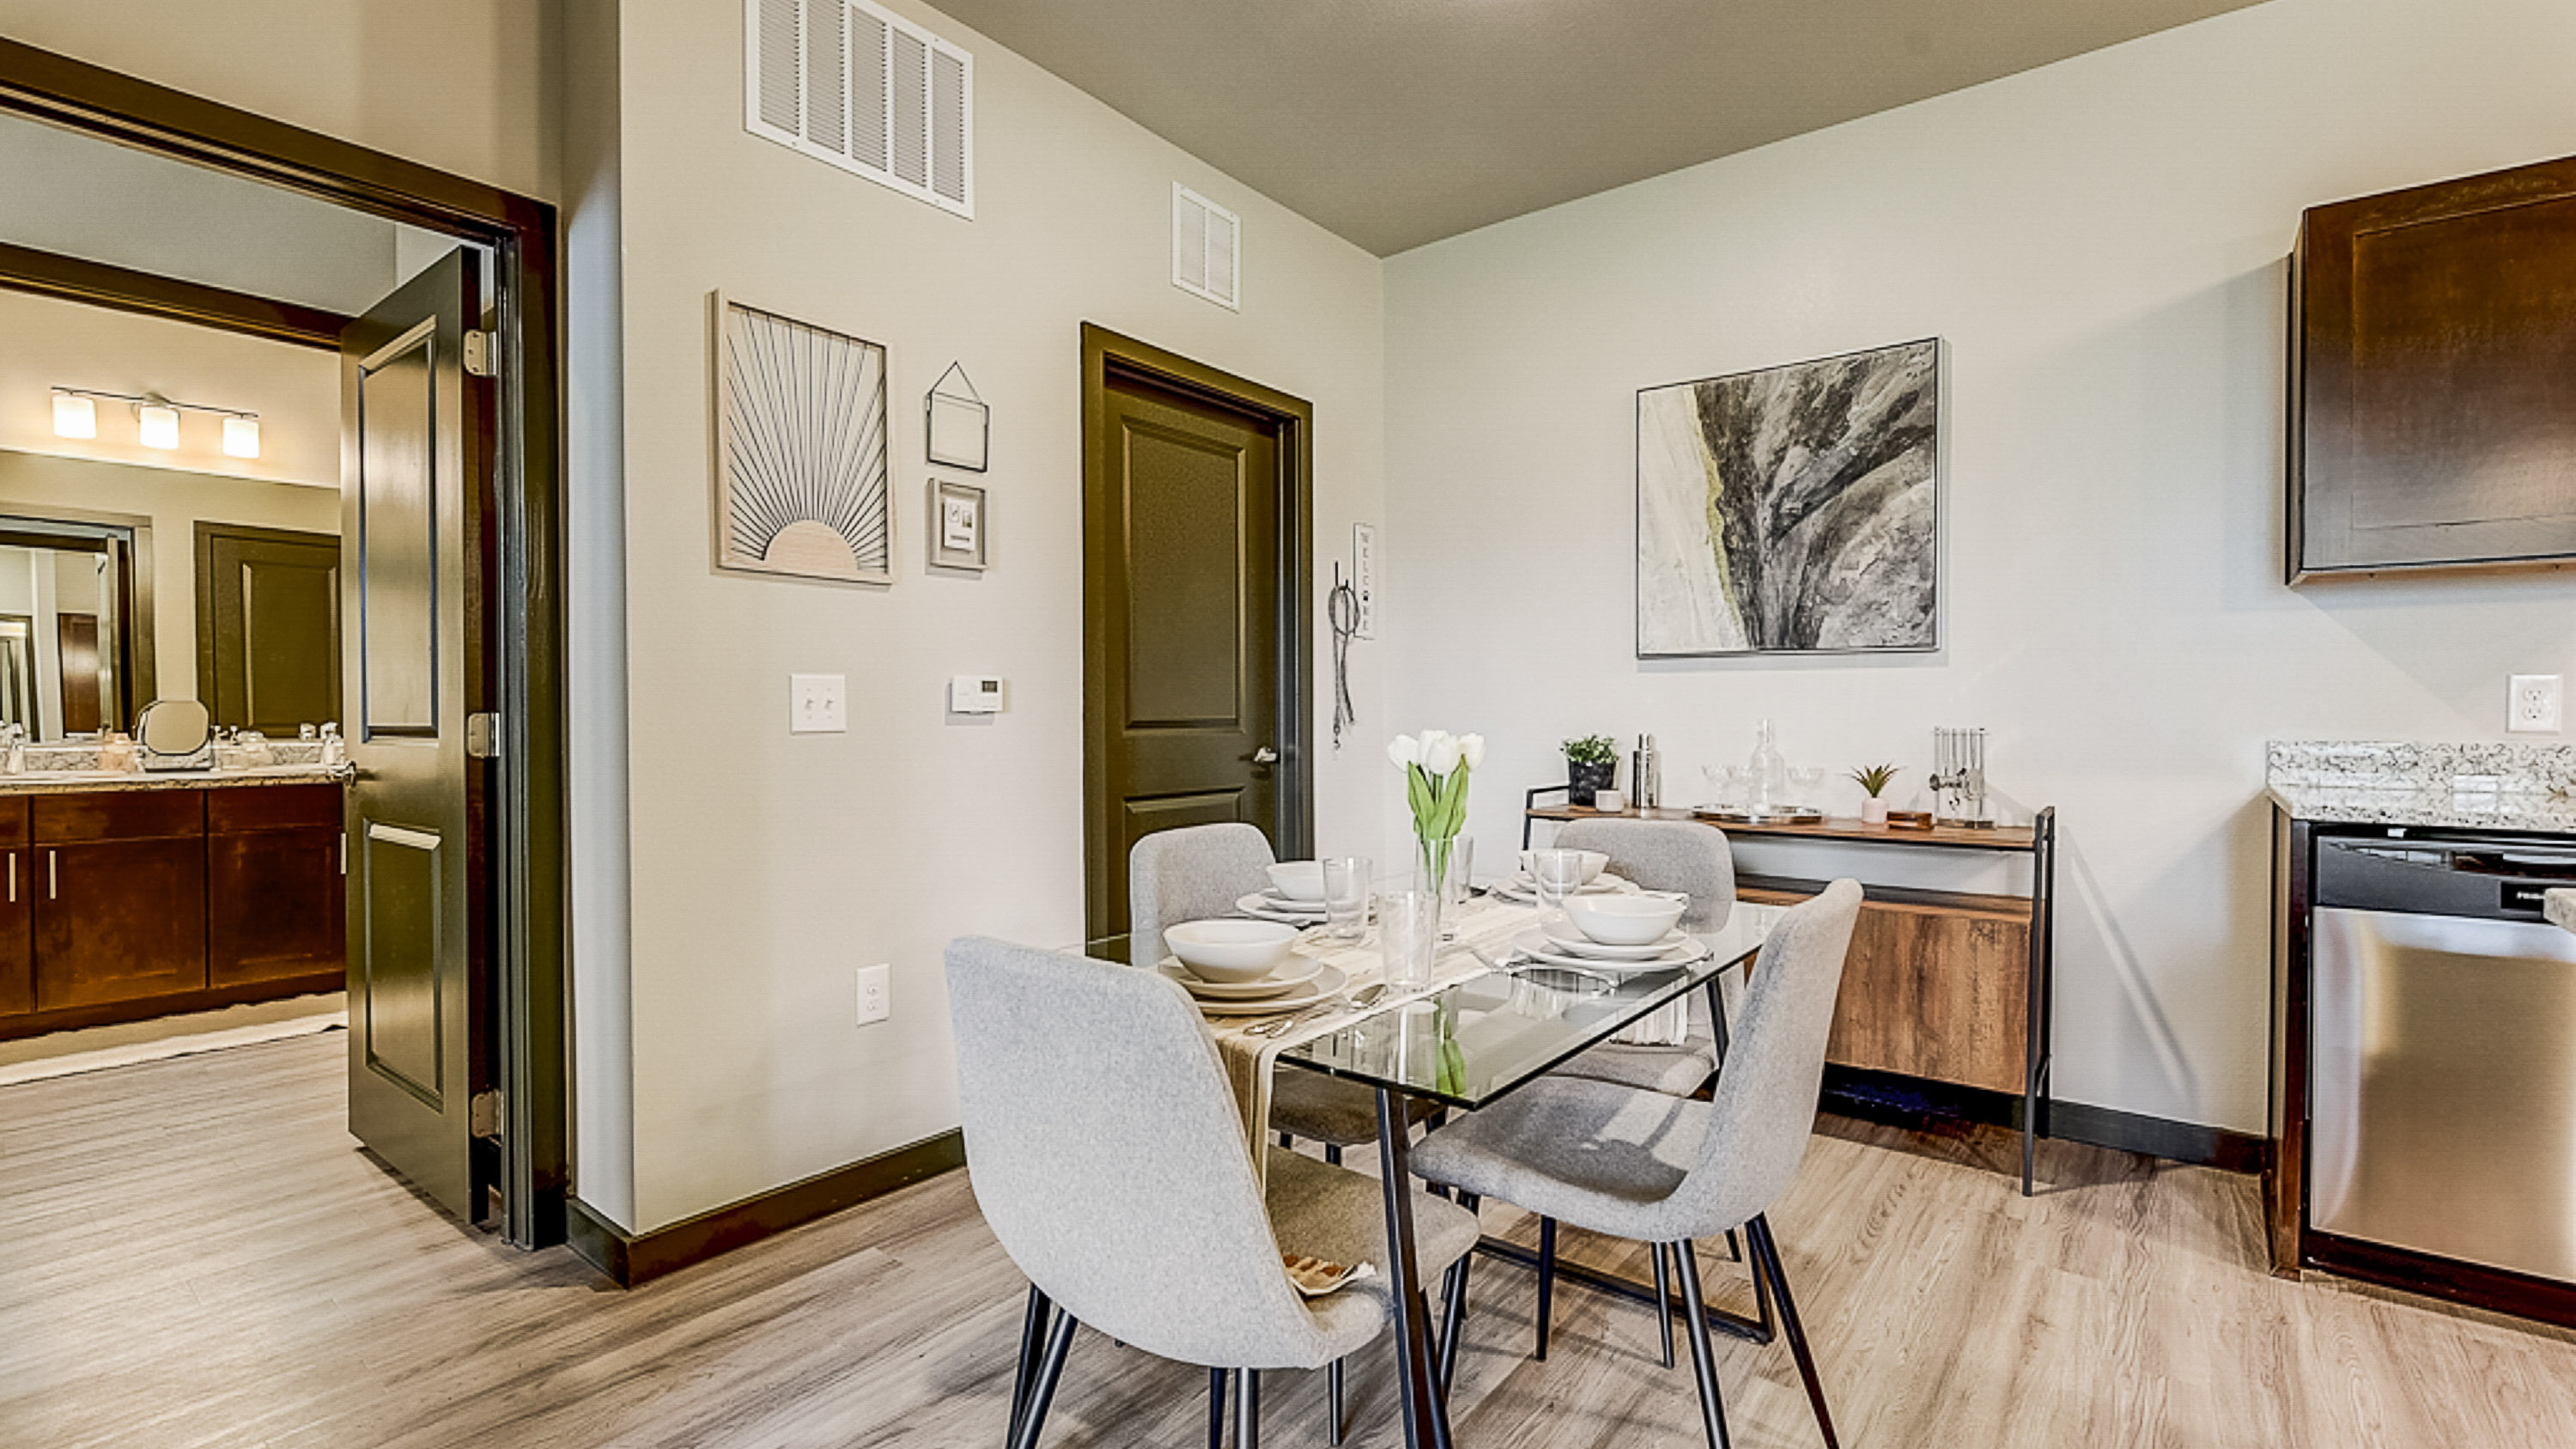 Washer and Dryer included, Dining Area, and Entry into the guest bathroom at Springs at Grand Prairie apartments-33